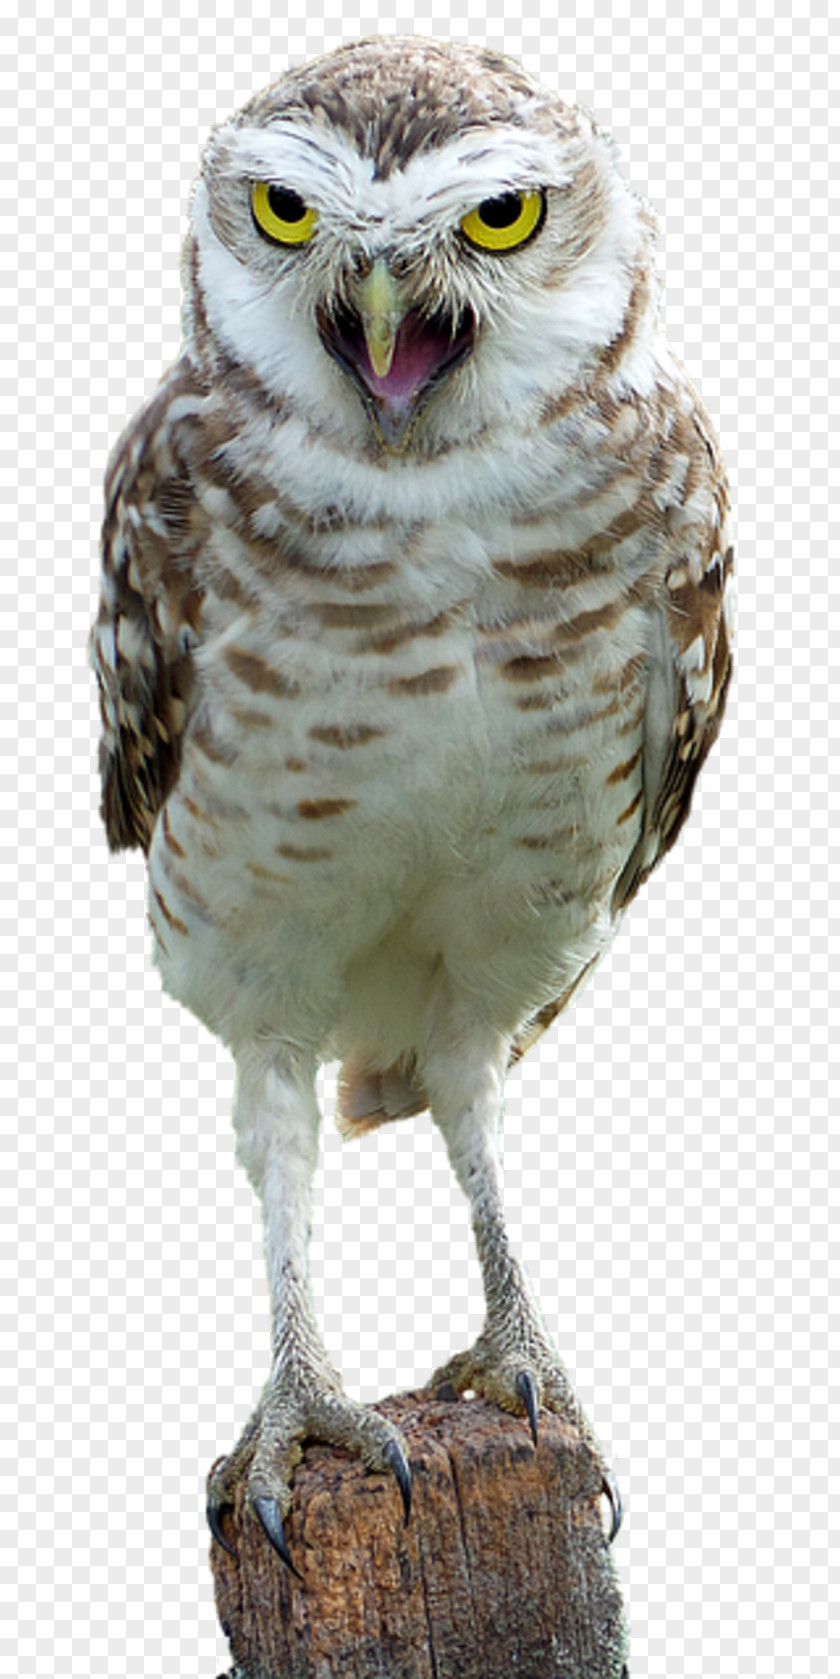 Bird Snowy Owl Pigeons And Doves Barred Great Horned PNG